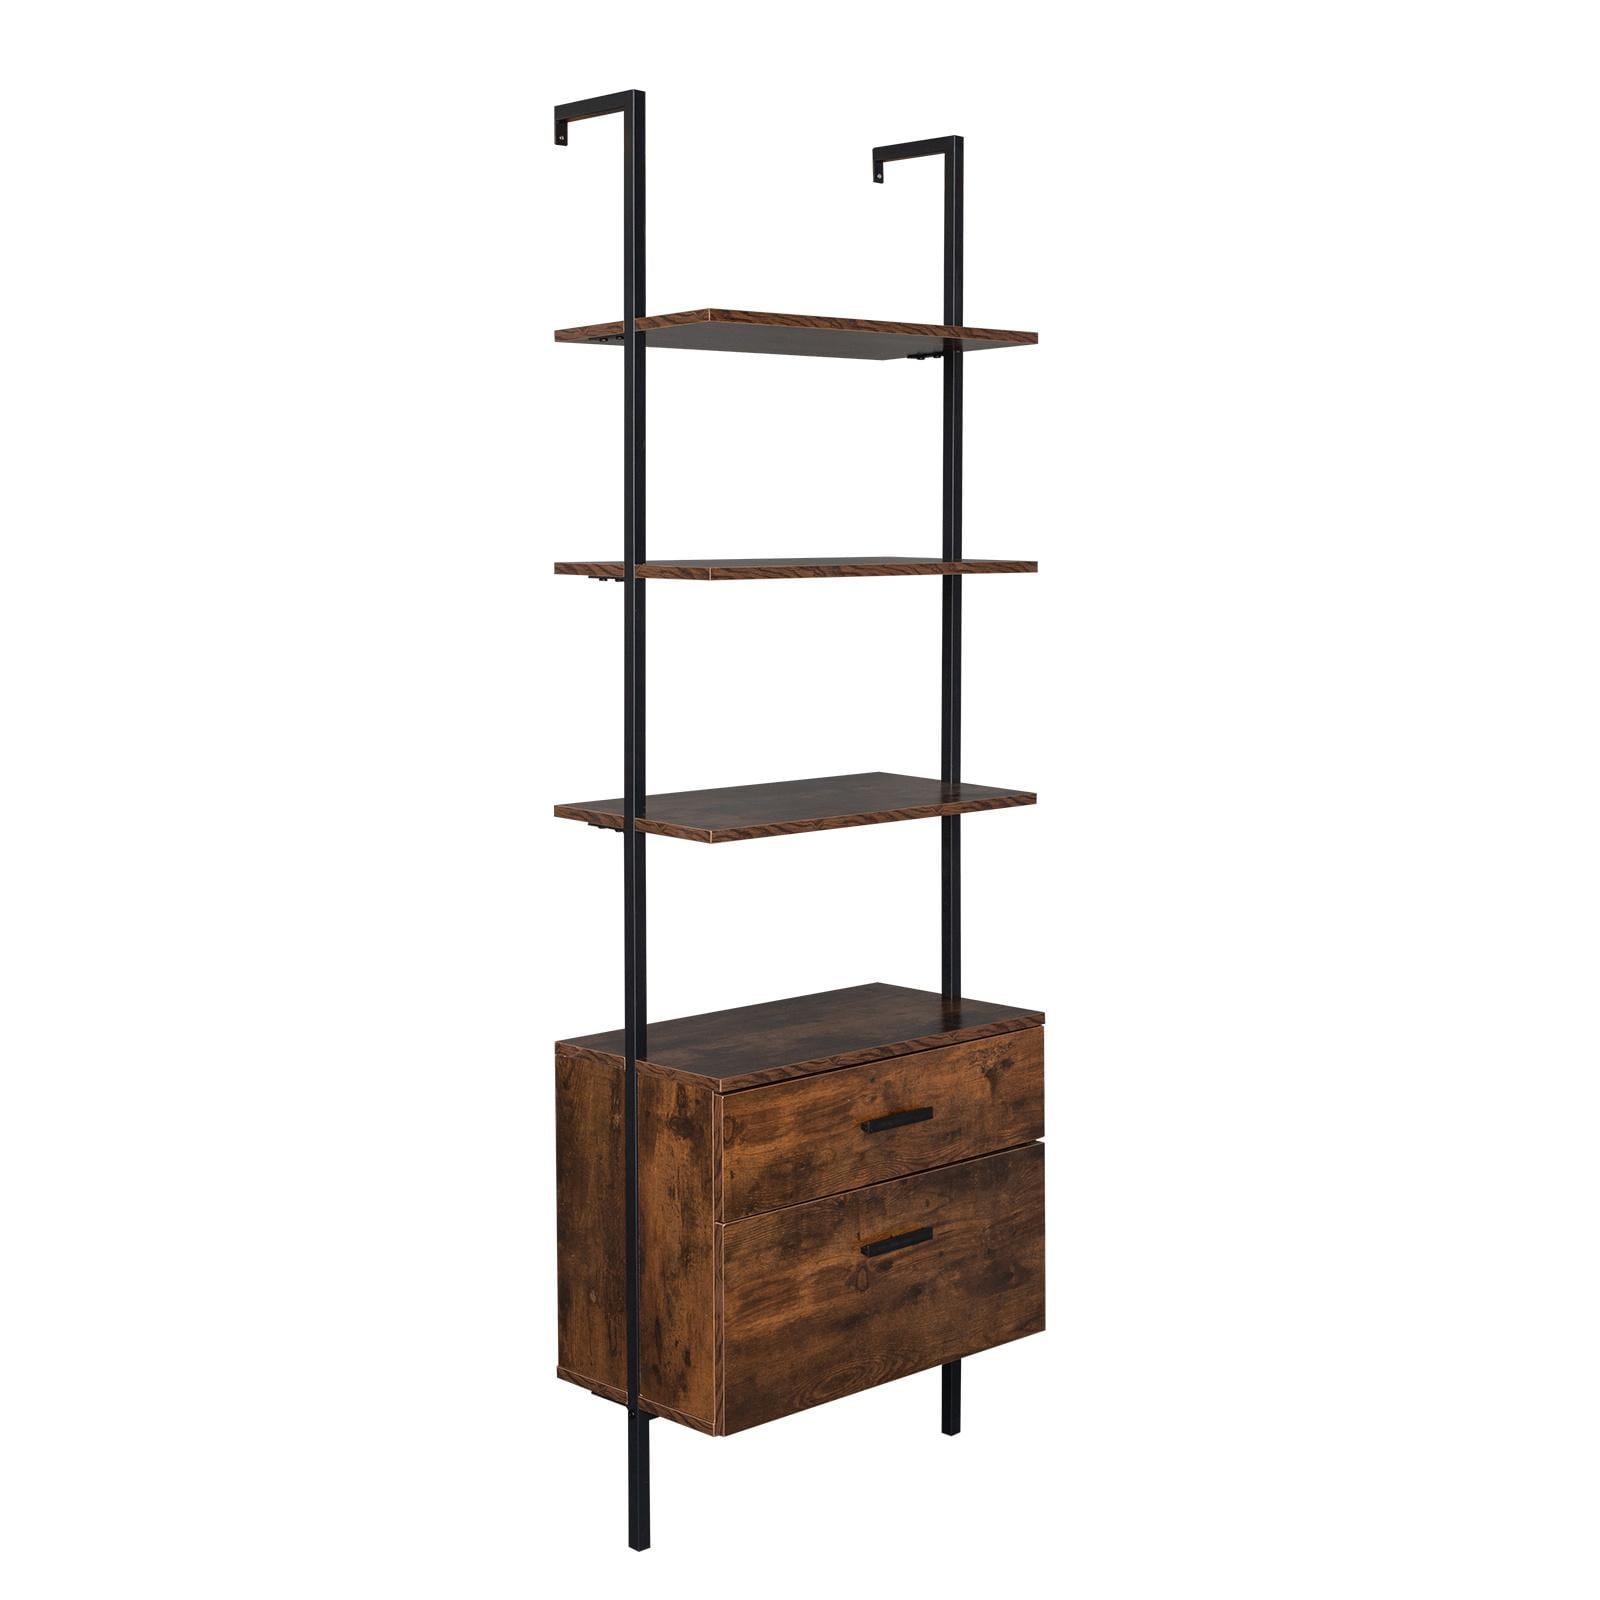 HOOSENG Bookcase with 2 Drawers Wooden Metal Frame Storage Cabinet Rustic Brown 4-Tier Open Bookshelf Organizer Rack Furniture for Living Room/Bedroom/Home Office 60 Free Standing Shelf